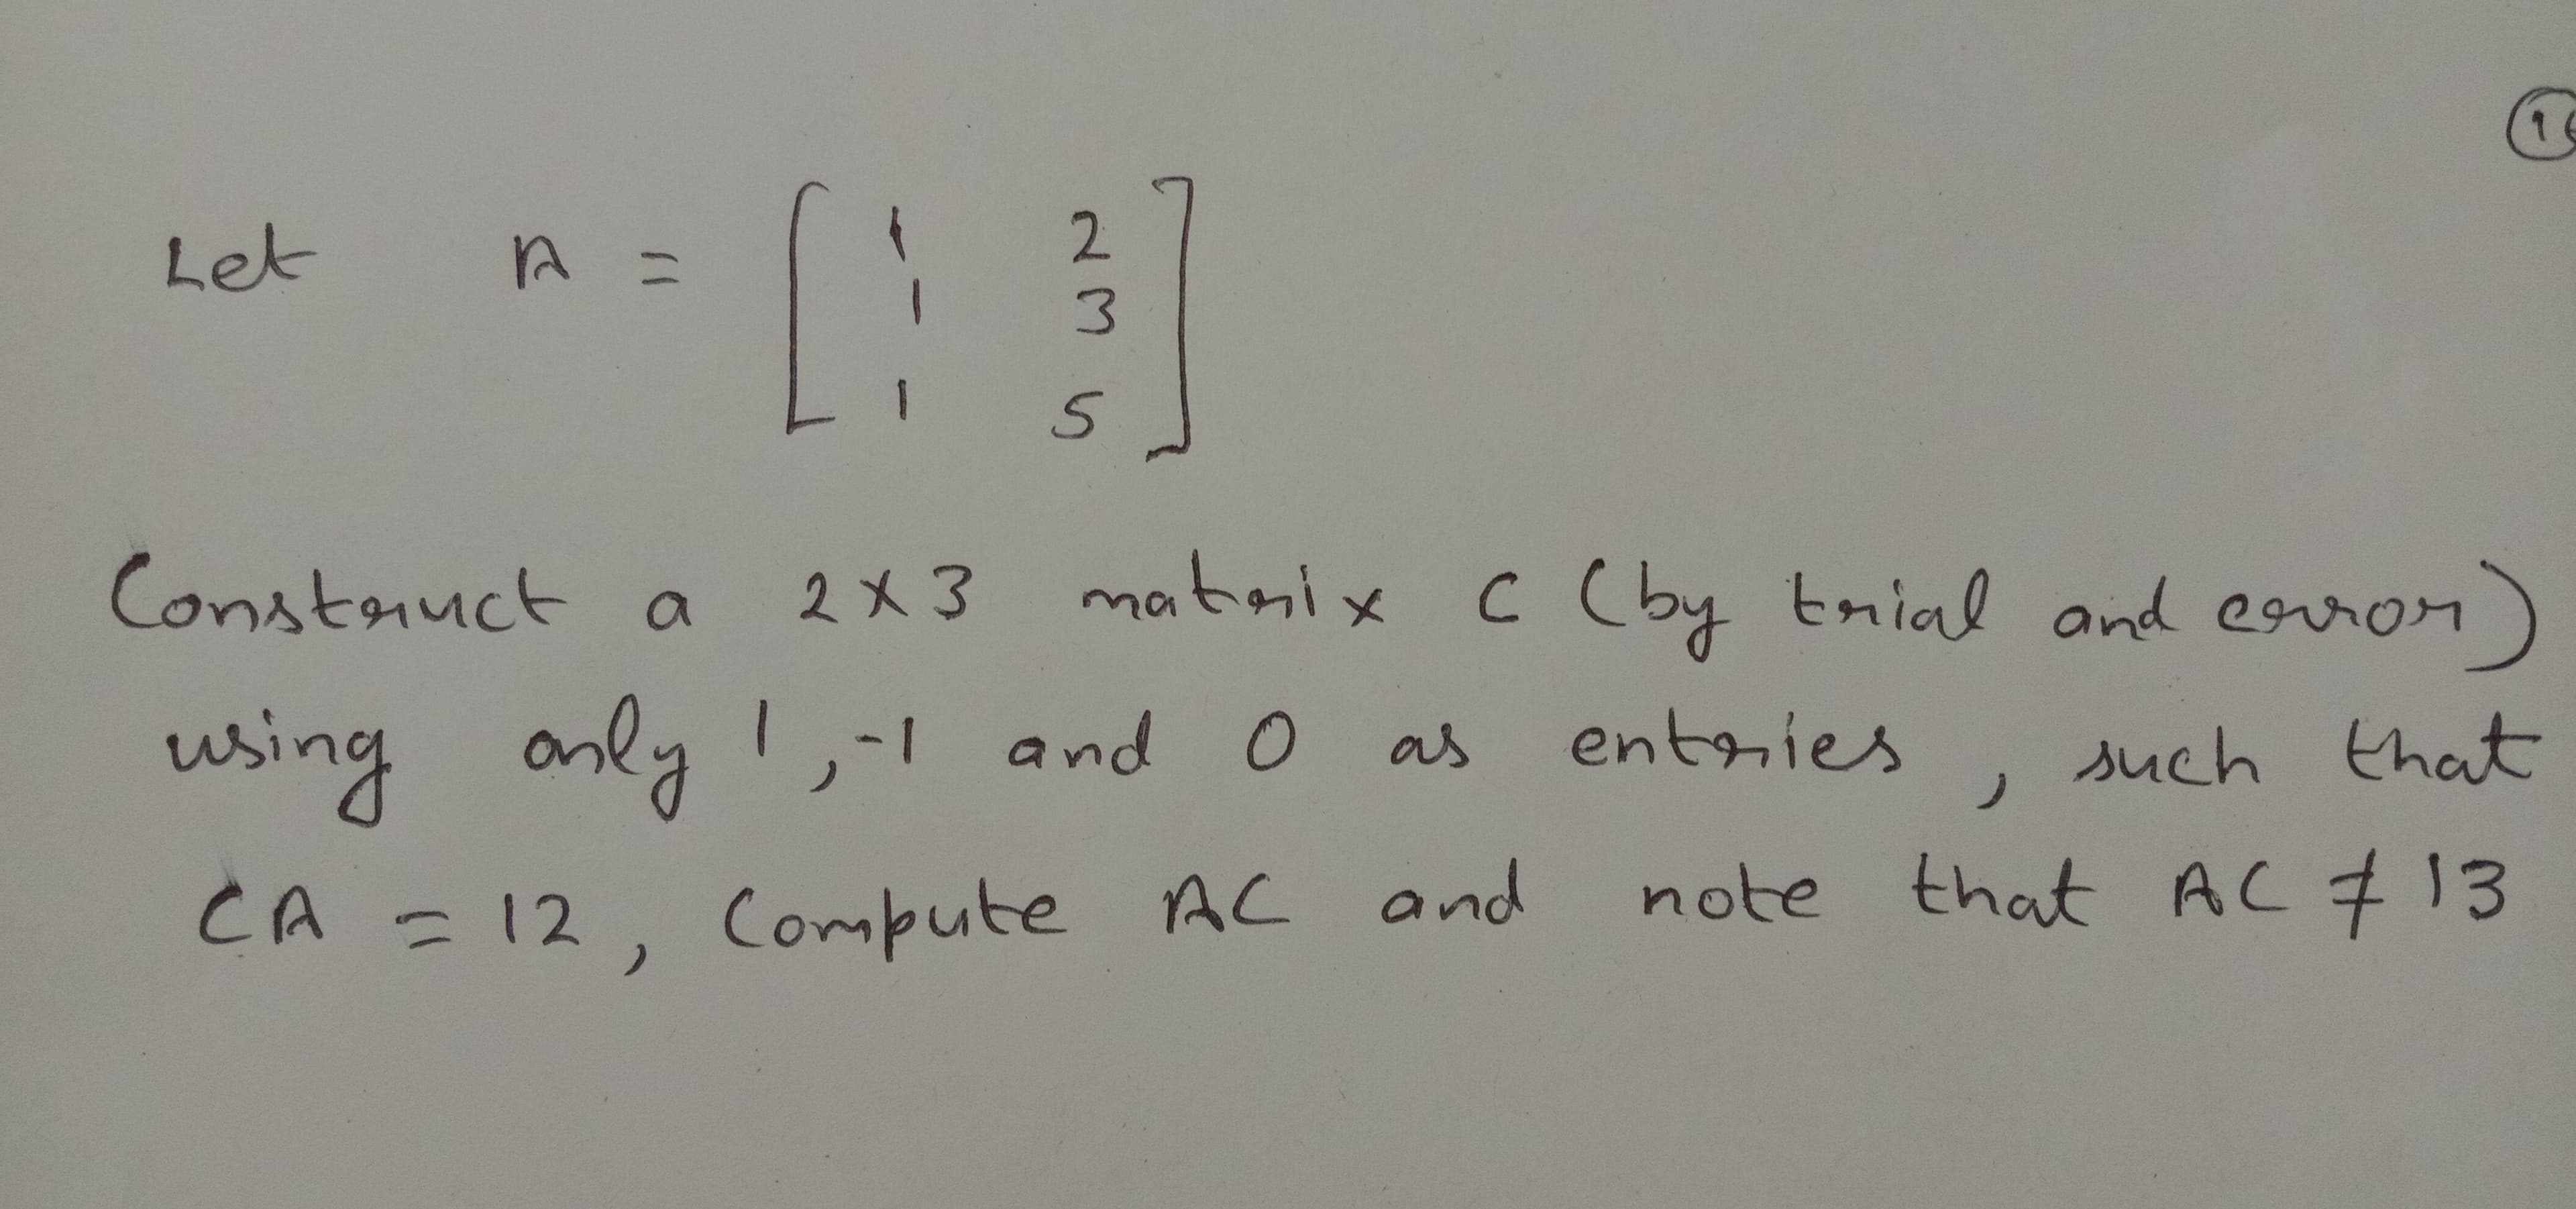 1 6
[:
2.
Let
%3D
matnix c (by tnial and erron)
Constauct a
C (by tnial and eror
using anly !,-1 and 0
entries
such that
as
note that AC713
CA = 12, Compute AC and
